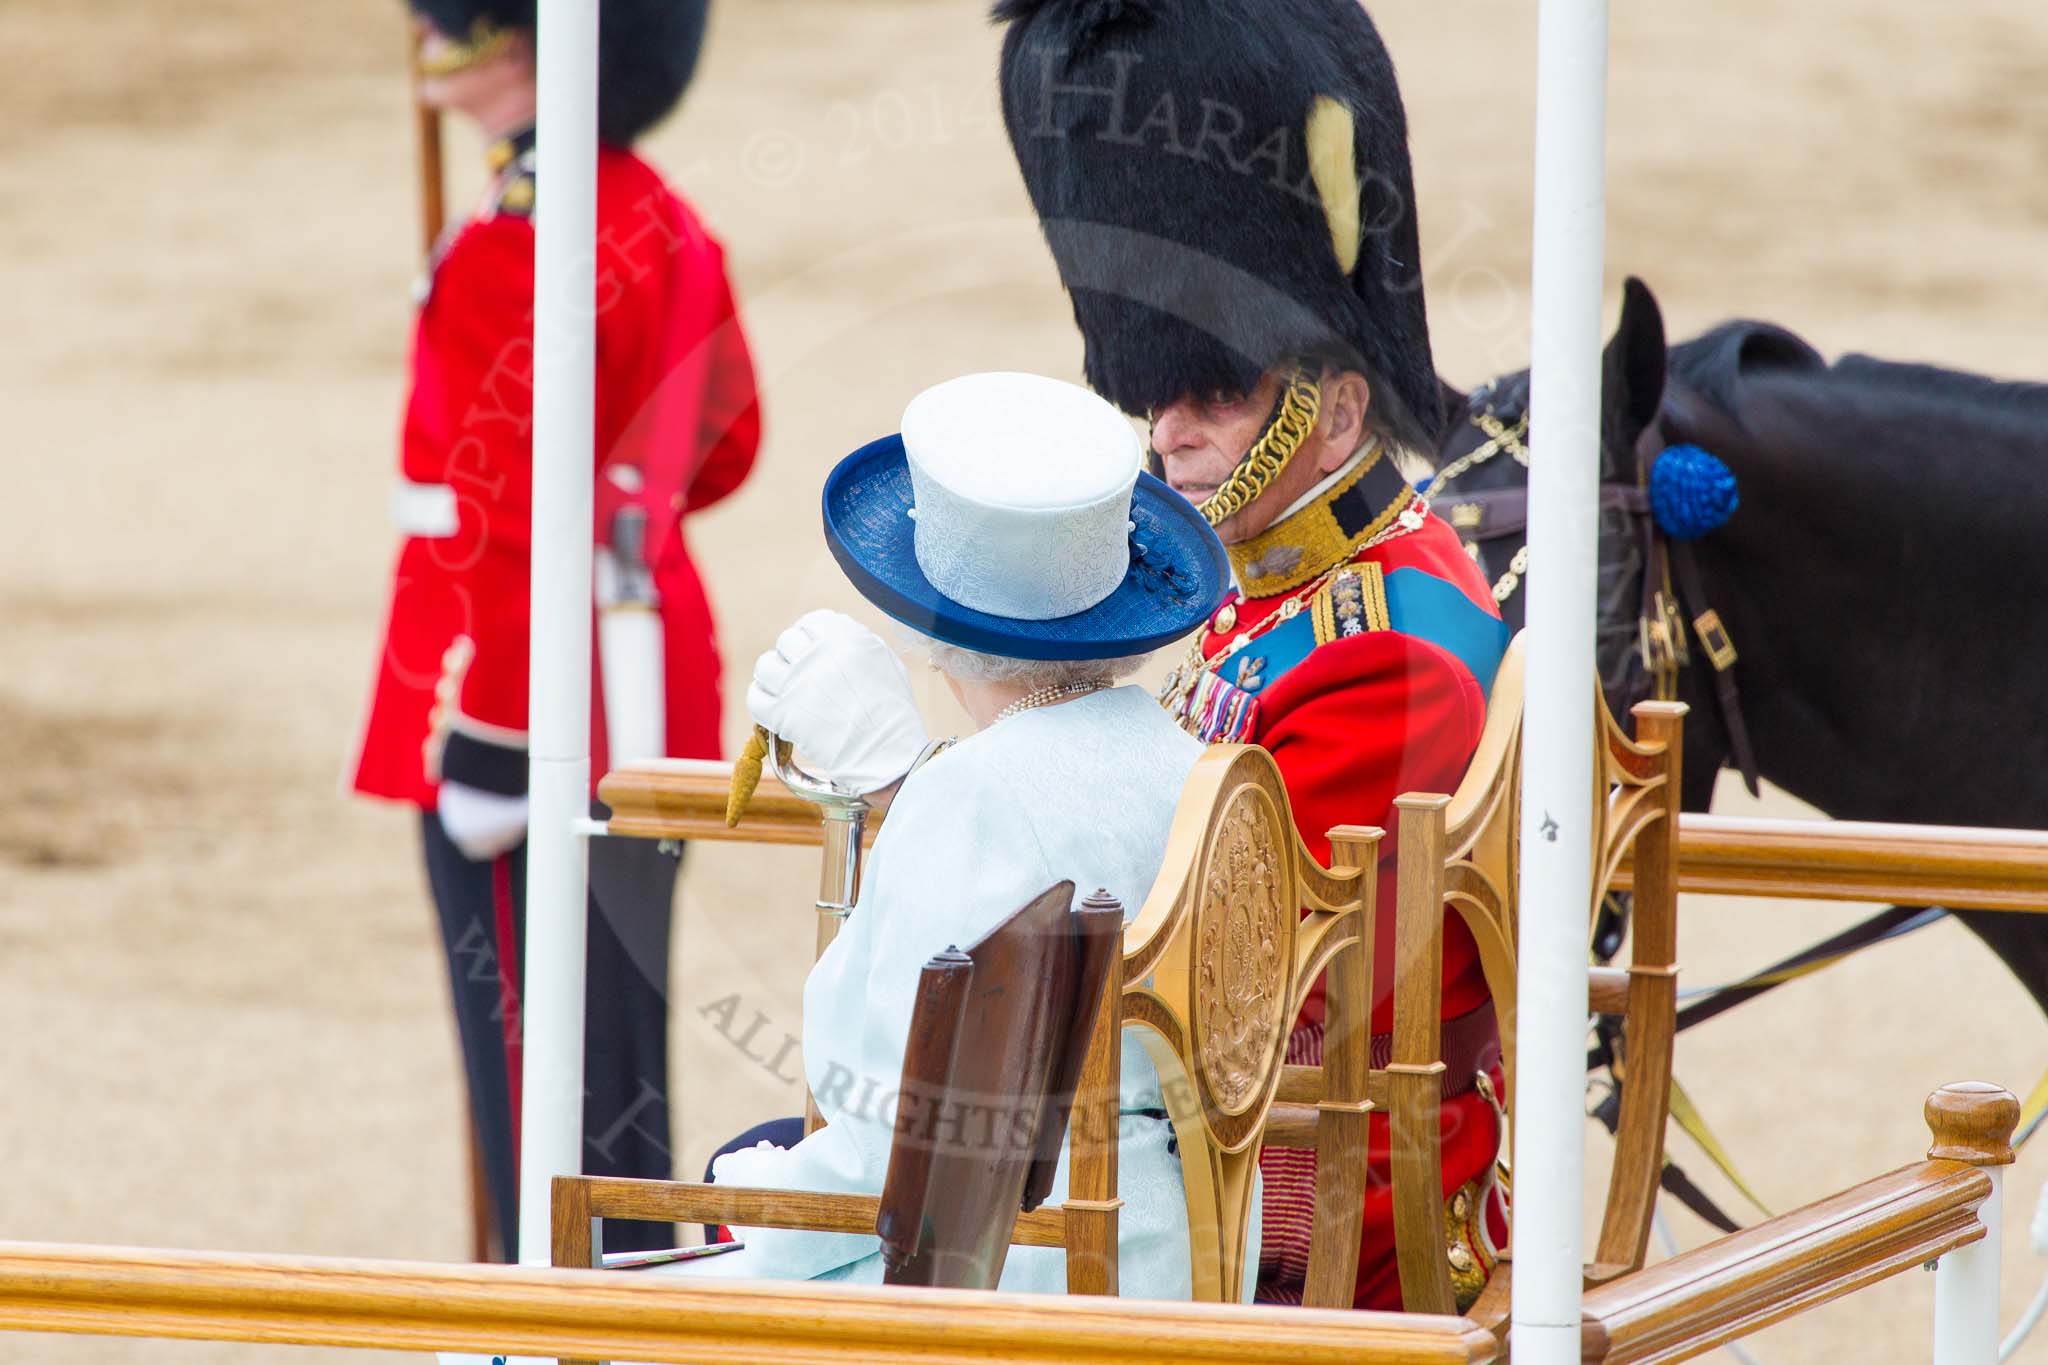 Trooping the Colour 2014.
Horse Guards Parade, Westminster,
London SW1A,

United Kingdom,
on 14 June 2014 at 12:05, image #860